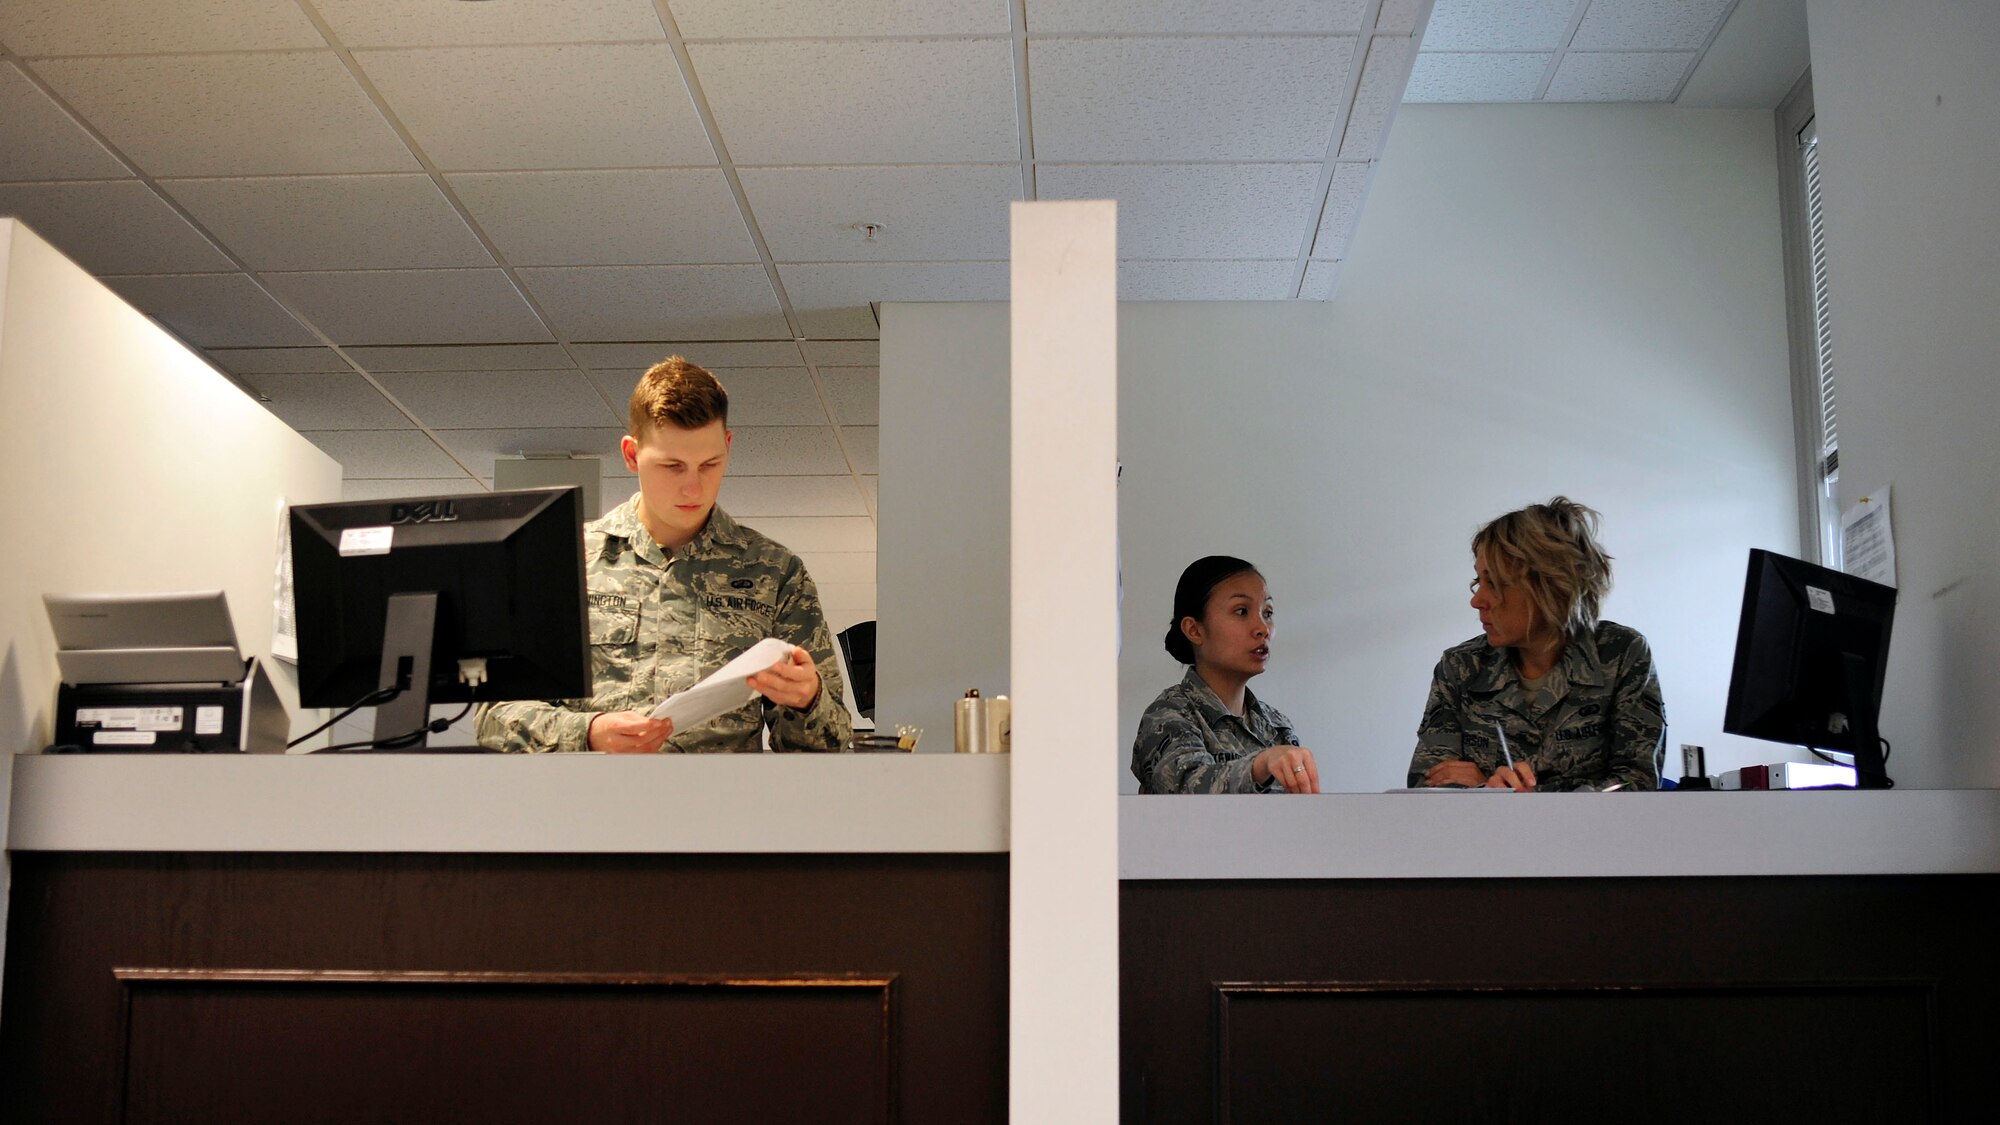 Airman 1st Class James Lenington (left), 62nd Comptroller Squadron financial services technician, Airman 1st Class Joyce Stewart (center), 62nd CPTS financial services technician, and Airman 1st Class Kelly McPherson (right), 62nd CPTS financial services technician, perform training and administrative tasks while waiting for customers to arrive at the finance office, April 4, 2017 at McChord Field, Wash. Financial technicians are available to help with military pay, travel pay to include permanent change of station and temporary duty, LeaveWeb, and civilian pay and disbursing. (U.S. Air Force photo/Staff Sgt. Whitney Amstutz)